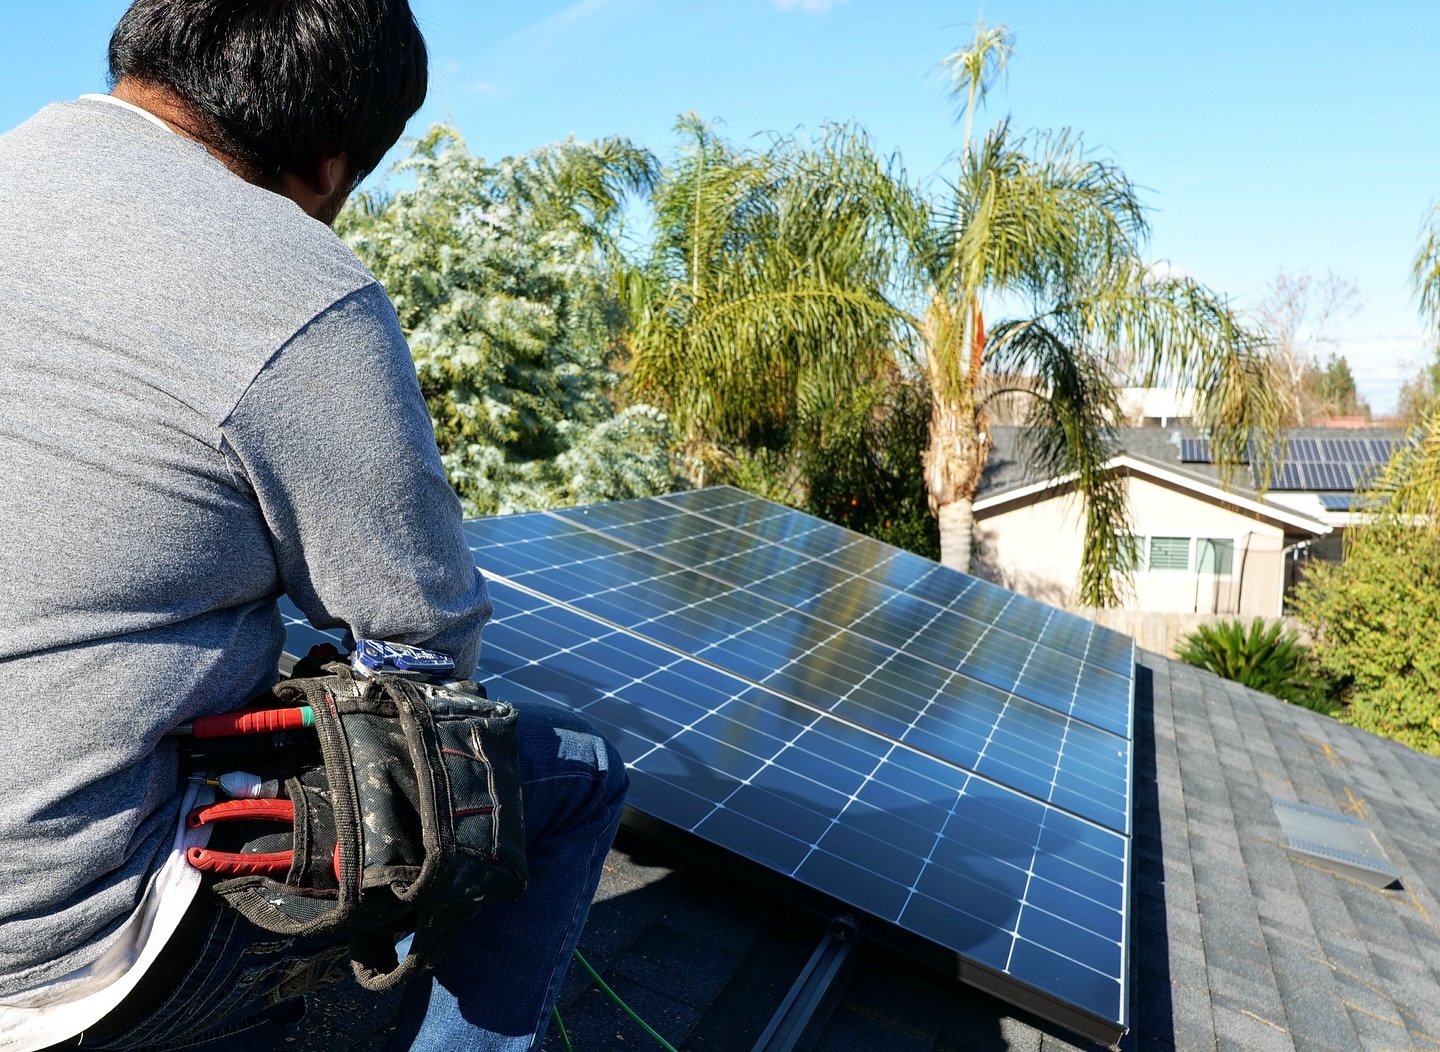 👨&zwj;🔧 Our installation team is flexible and dedicated to ensuring you get the custom designed solar systems you expect. 👍 

☎️ Give us a call at (559) 251-5592 to get started! 

☀️ Learn more at the 🔗 in bio. 

#PacificSolar #Fresno #Solar #Sol